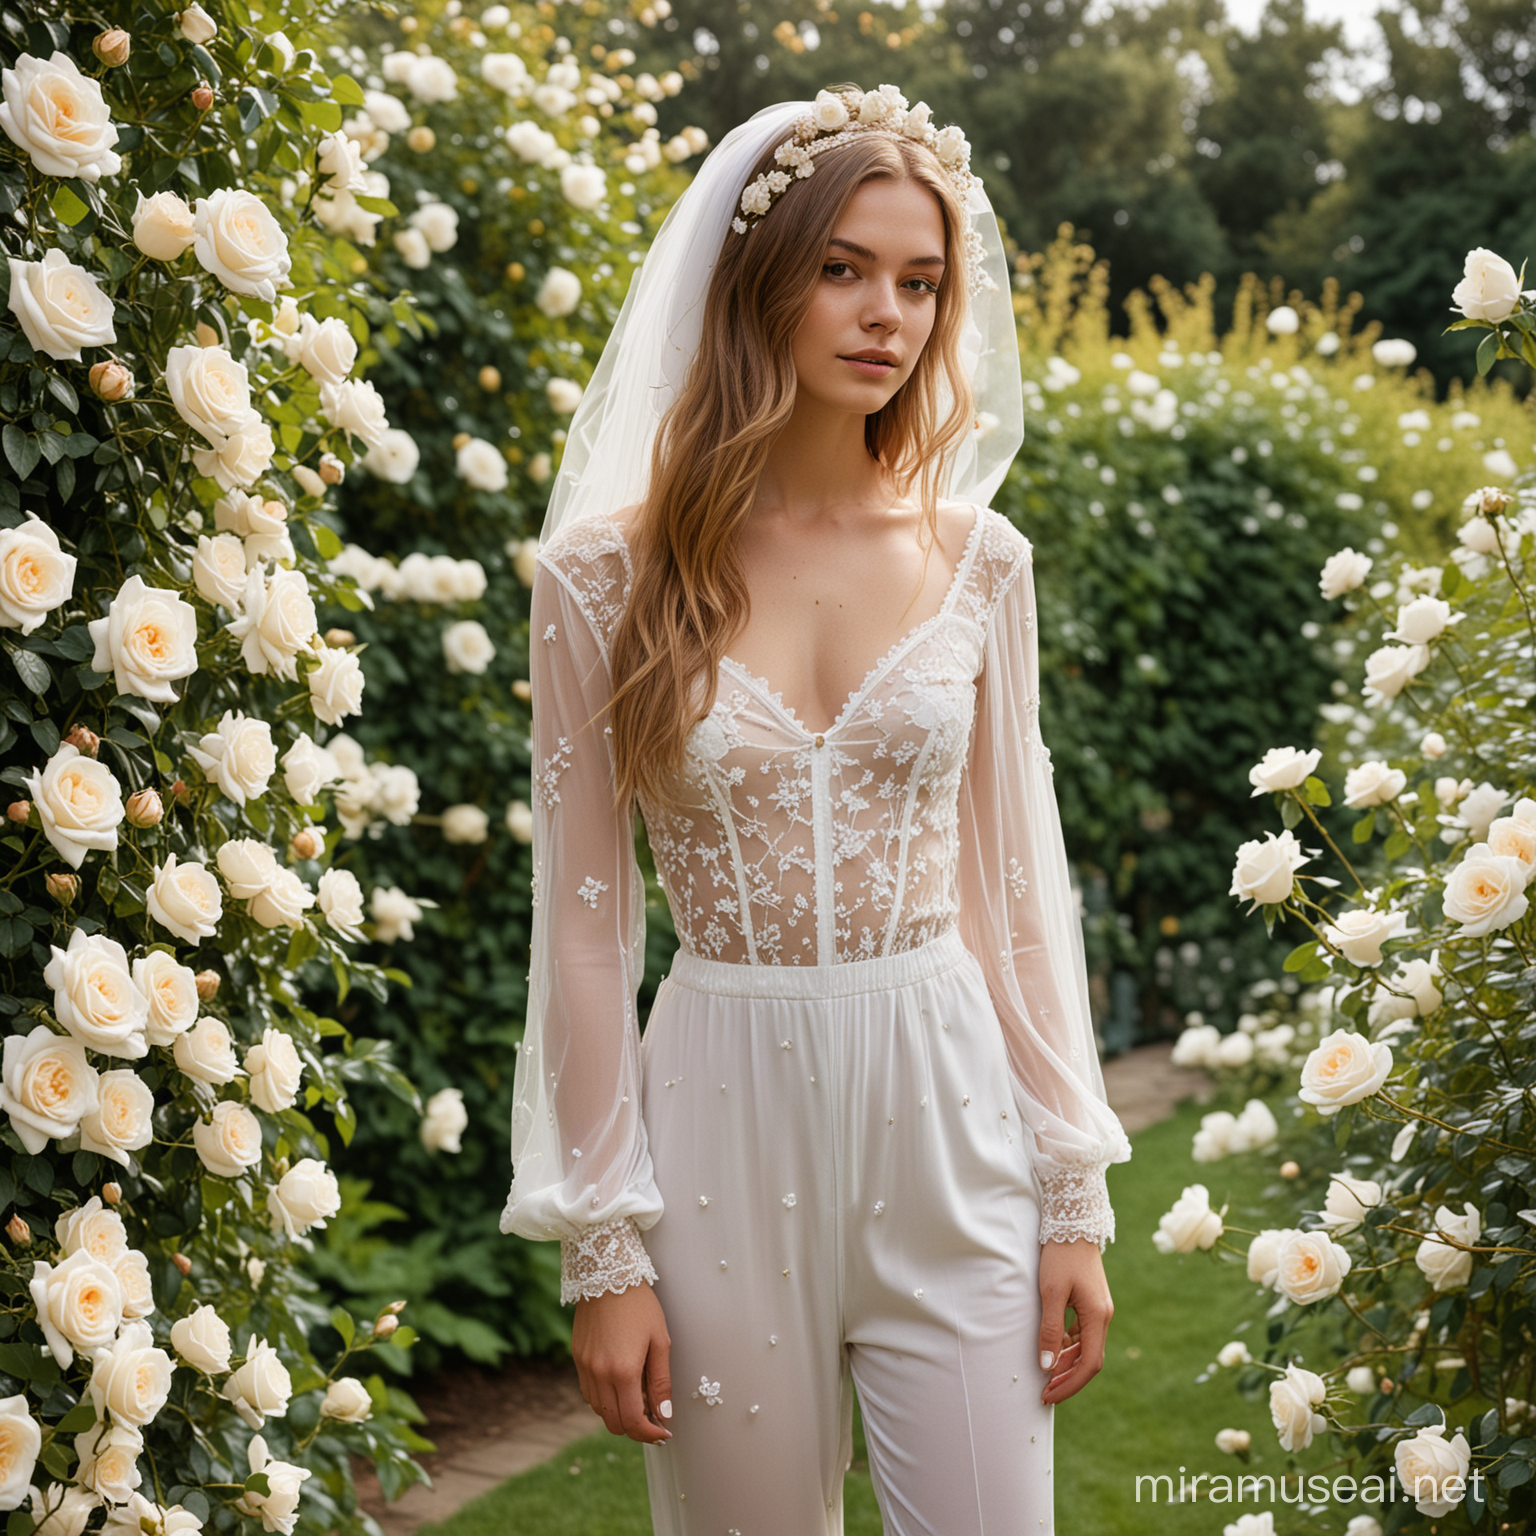 Young Woman in Elegant Wedding Jumpsuit and Veil amidst Luxurious Garden Roses